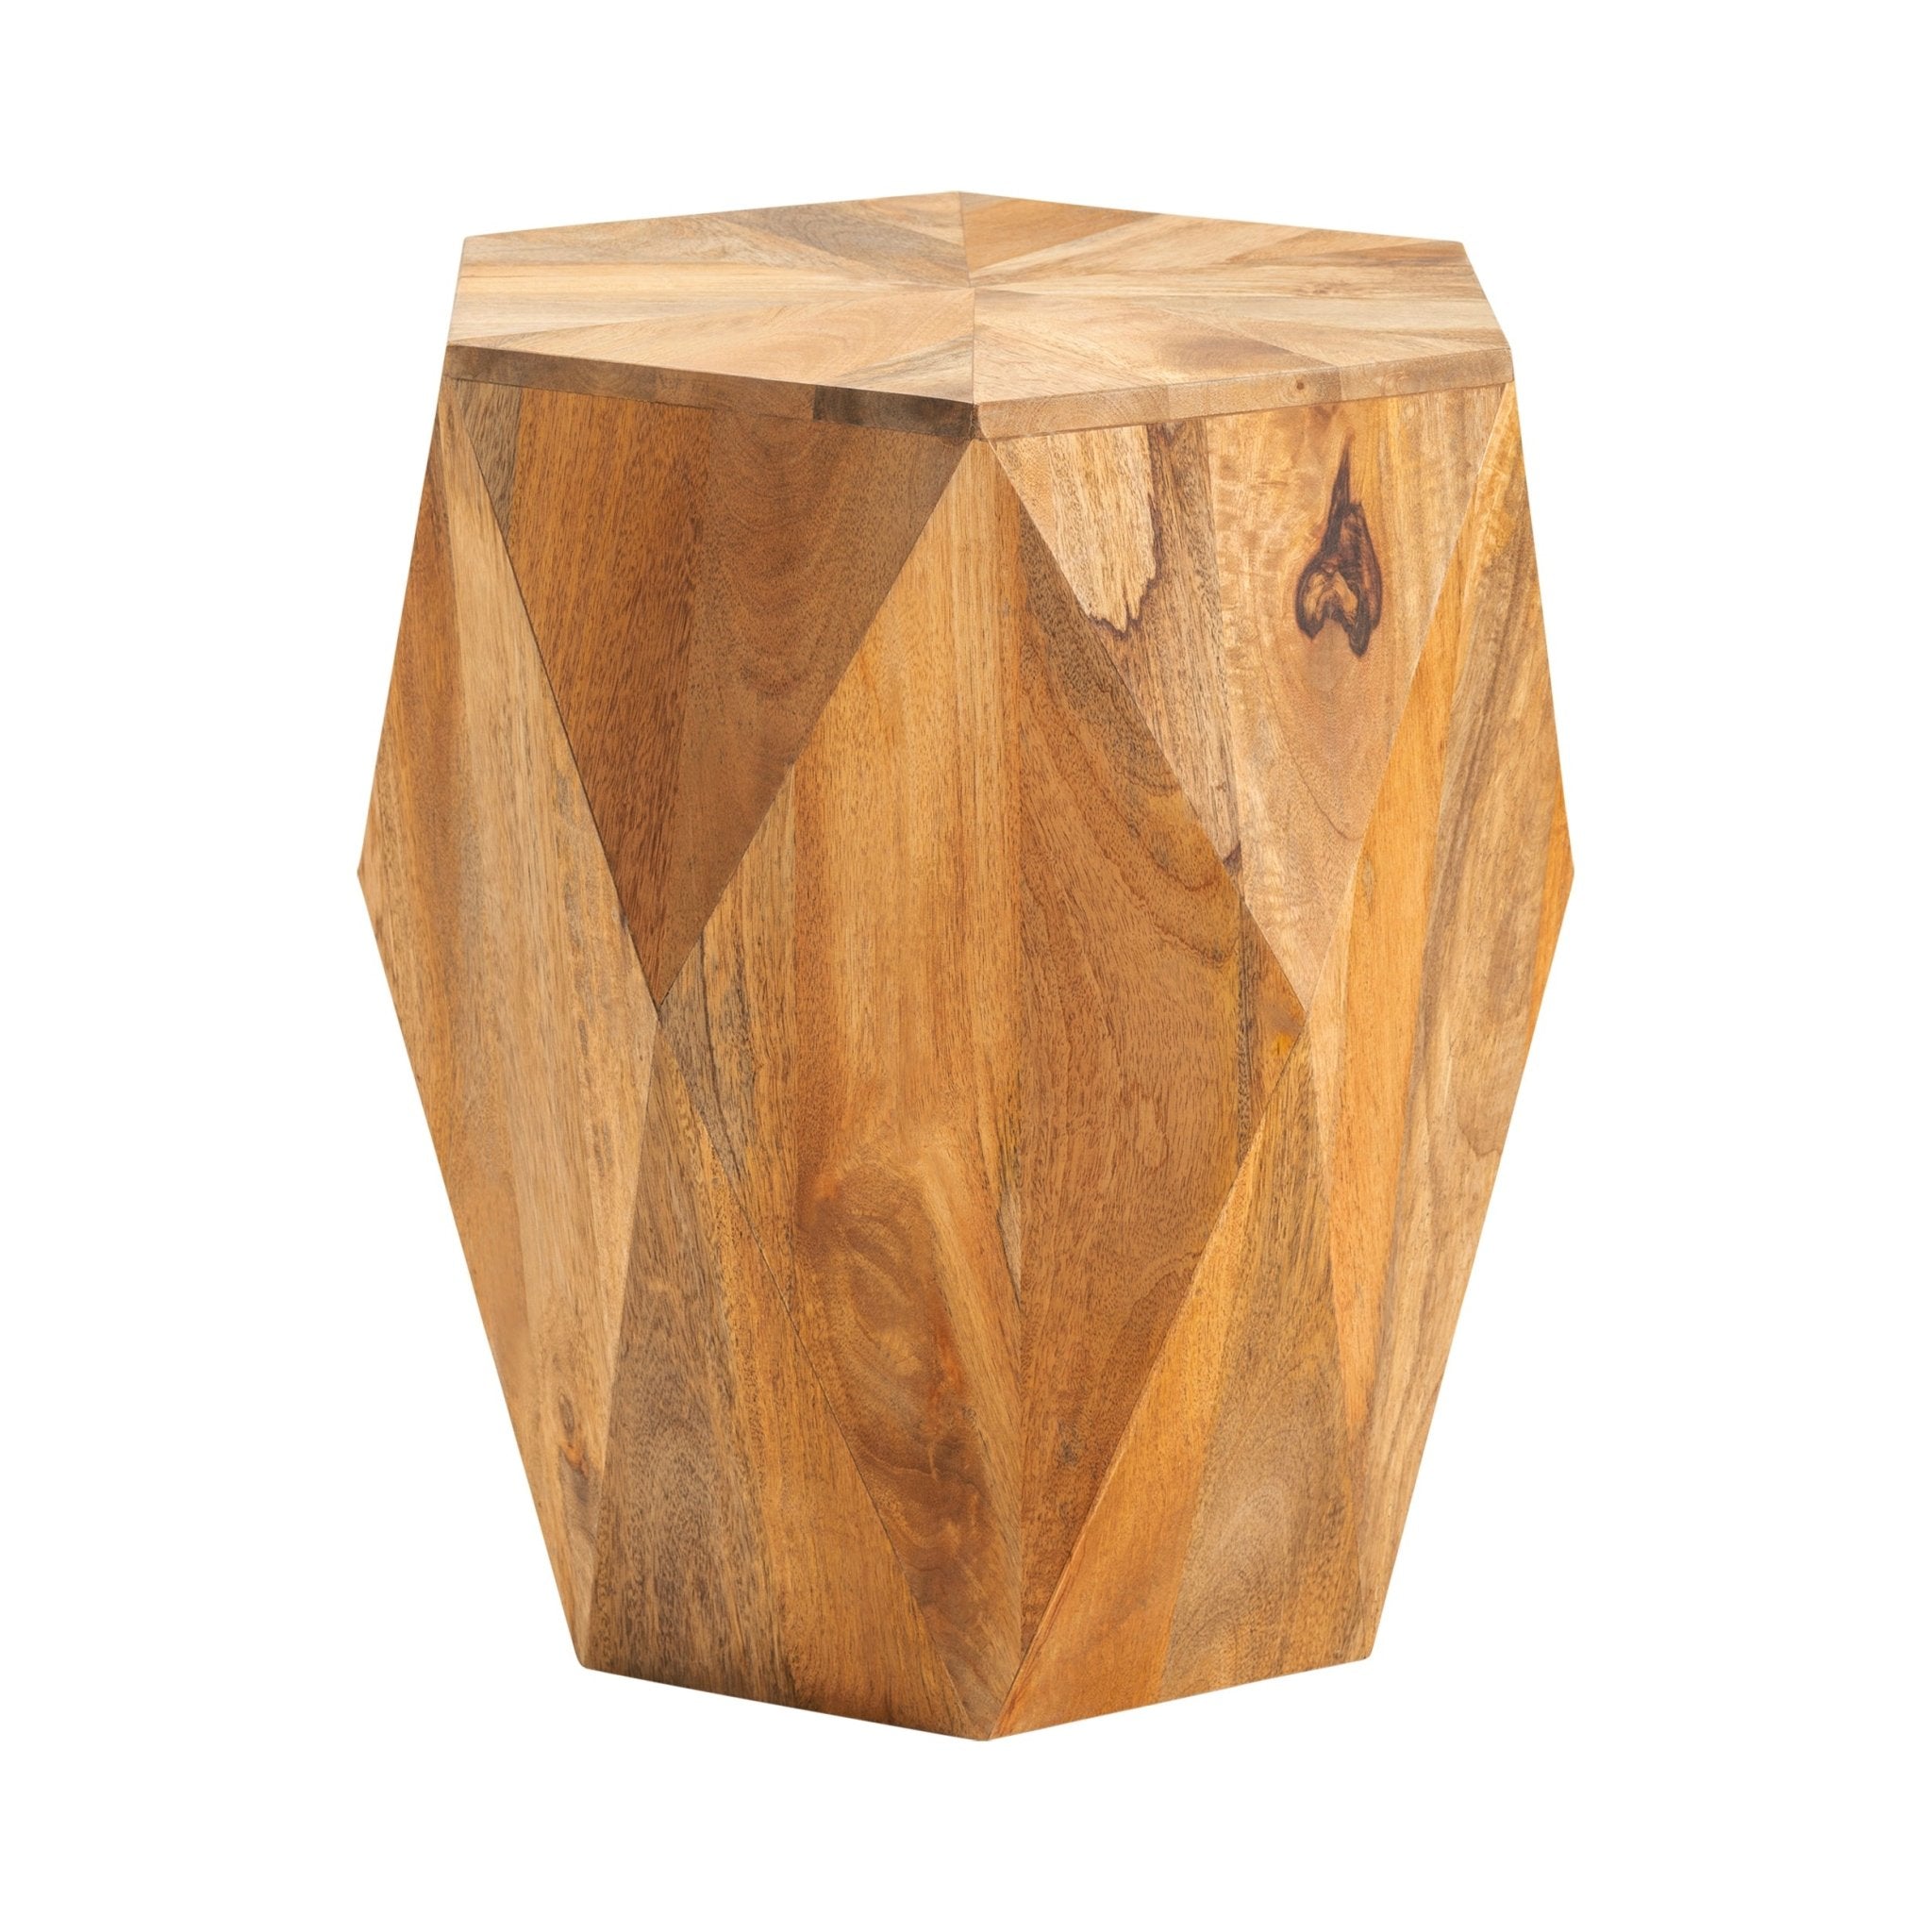 Serenity End Table